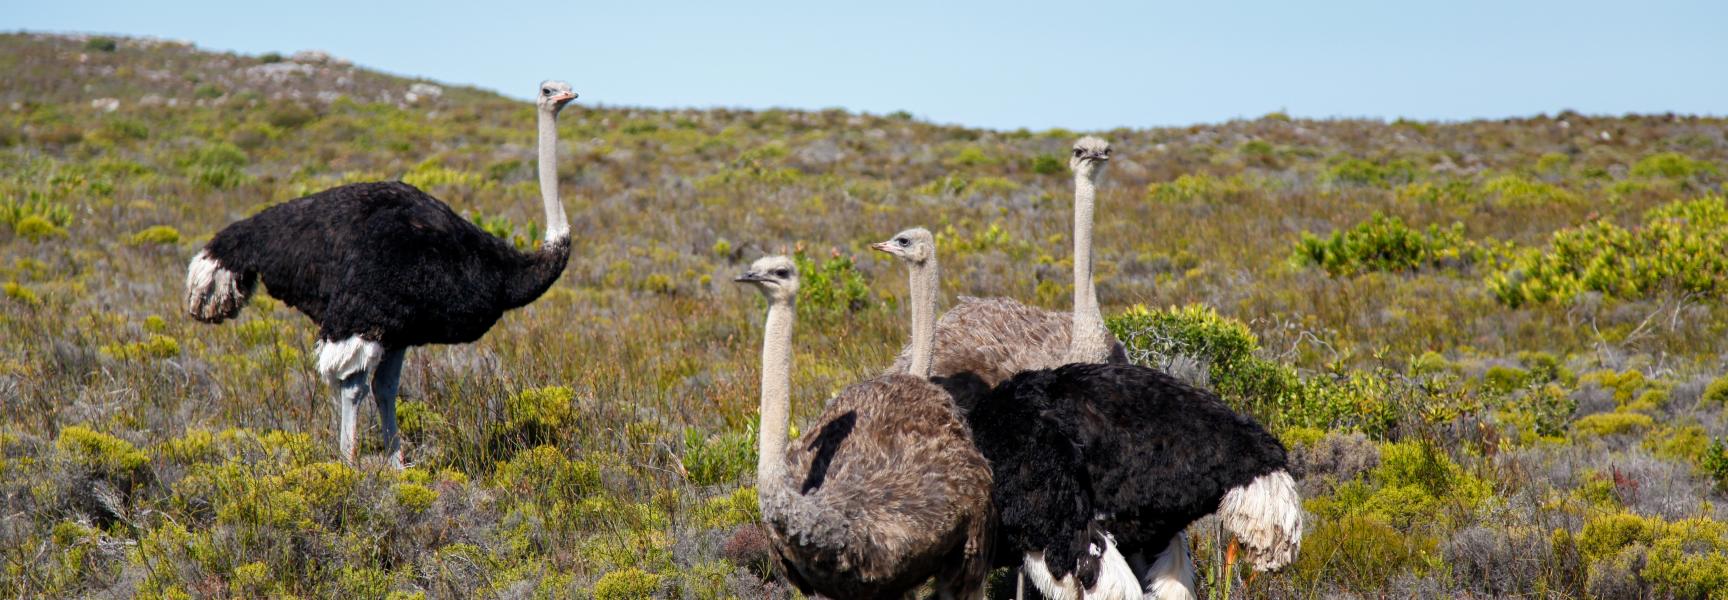 Ostriches from South Africa